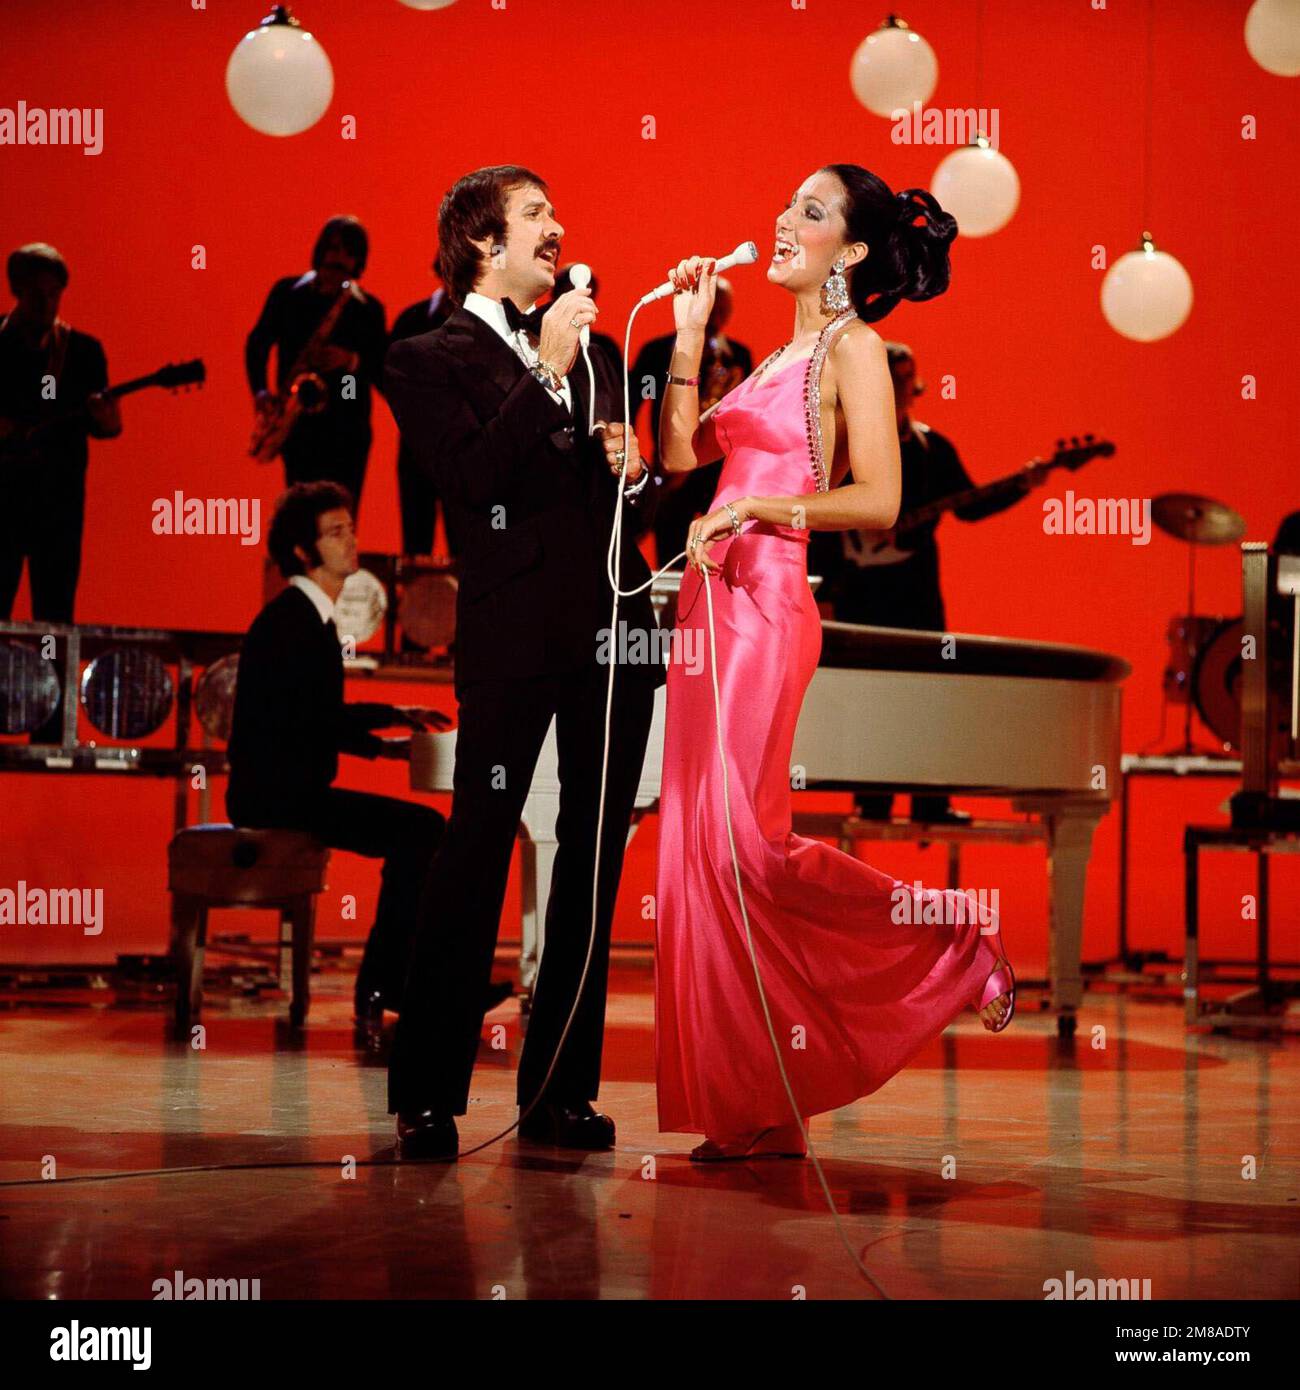 SONNY BONO and CHER in THE SONNY AND CHER COMEDY HOUR (1971), directed by ART FISHER. Credit: Columbia Broadcasting System (CBS) / Album Stock Photo